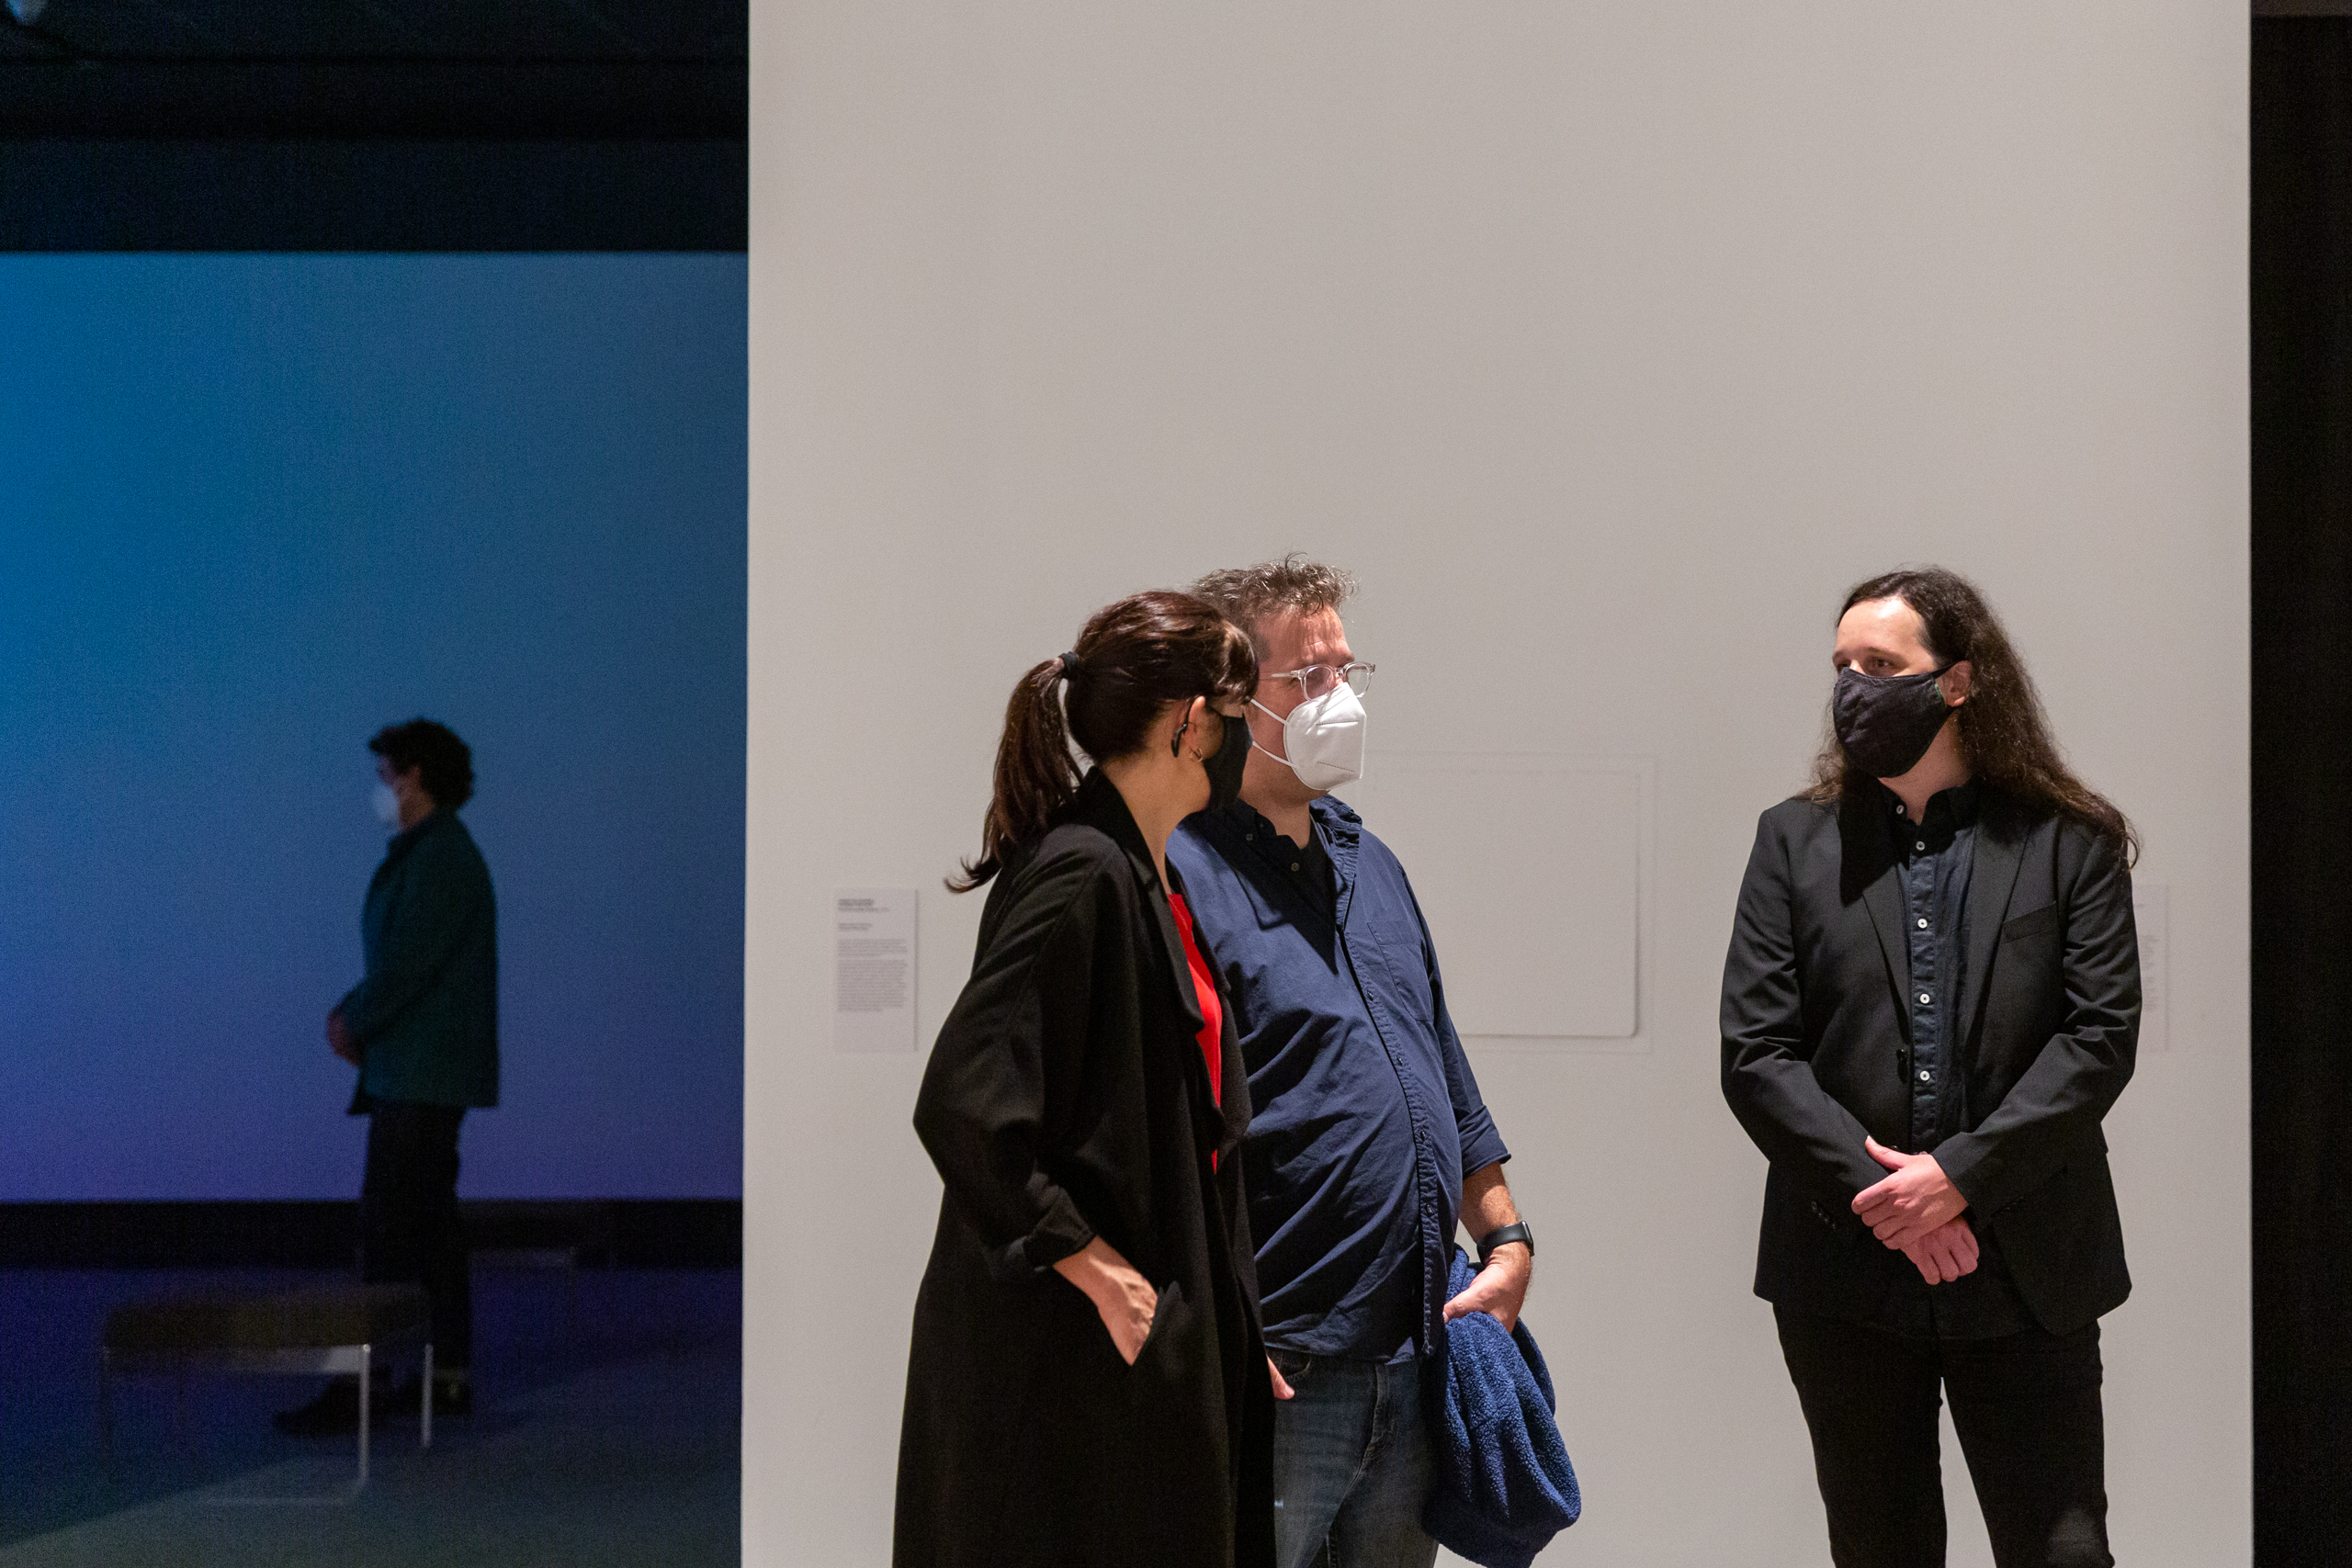 Two gallery visitors stand near Darryn Doull, a man in a dark suit and matching face mask, in the gallery in front of a white wall; a fourth person is visible in a blue-lit room behind them